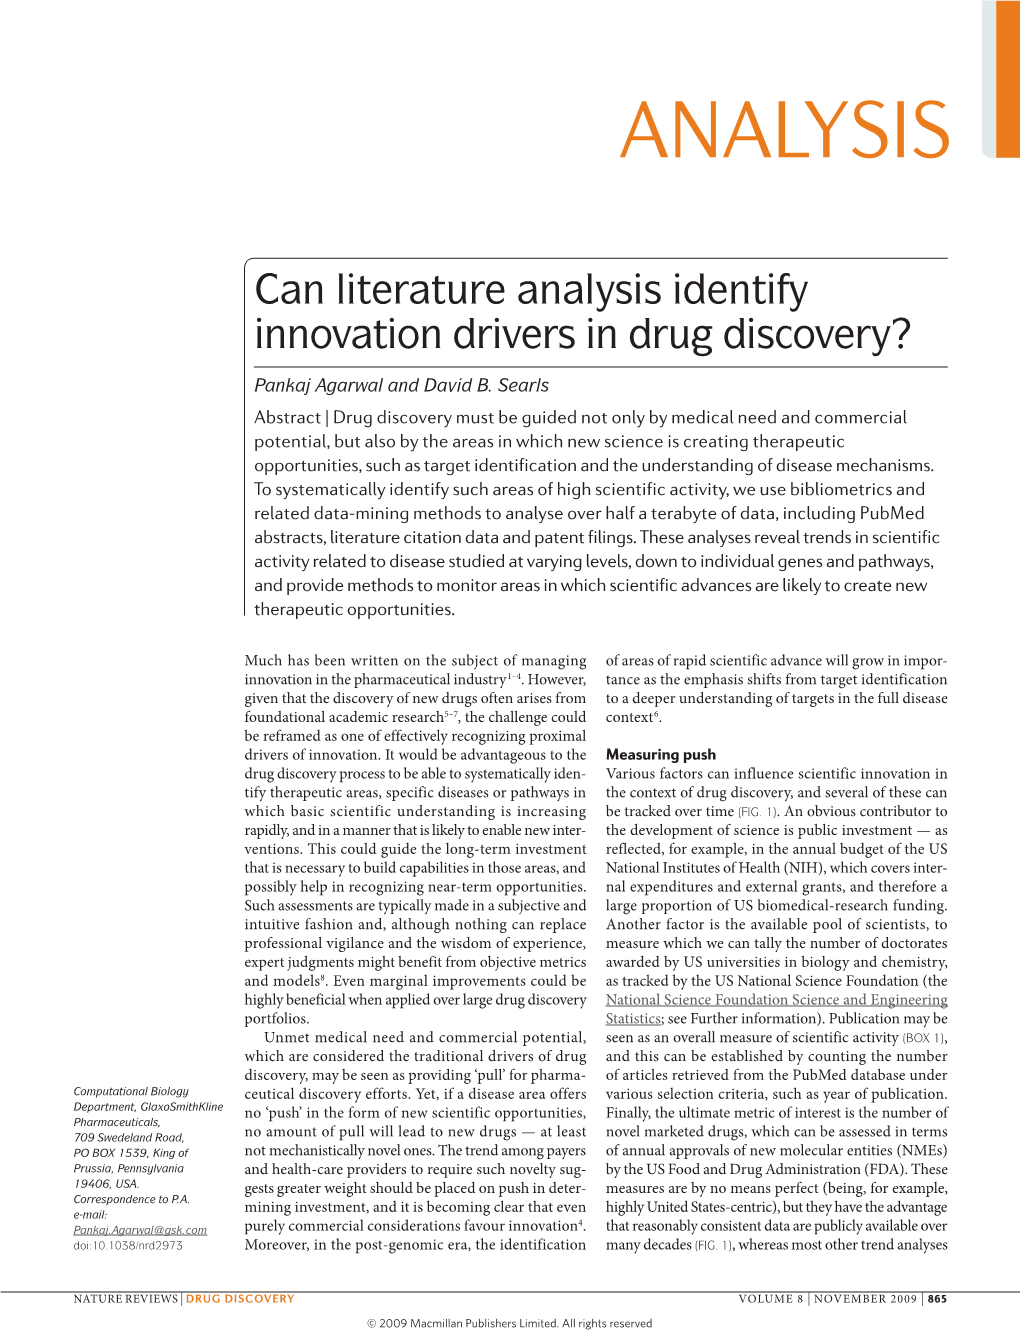 Can Literature Analysis Identify Innovation Drivers in Drug Discovery?